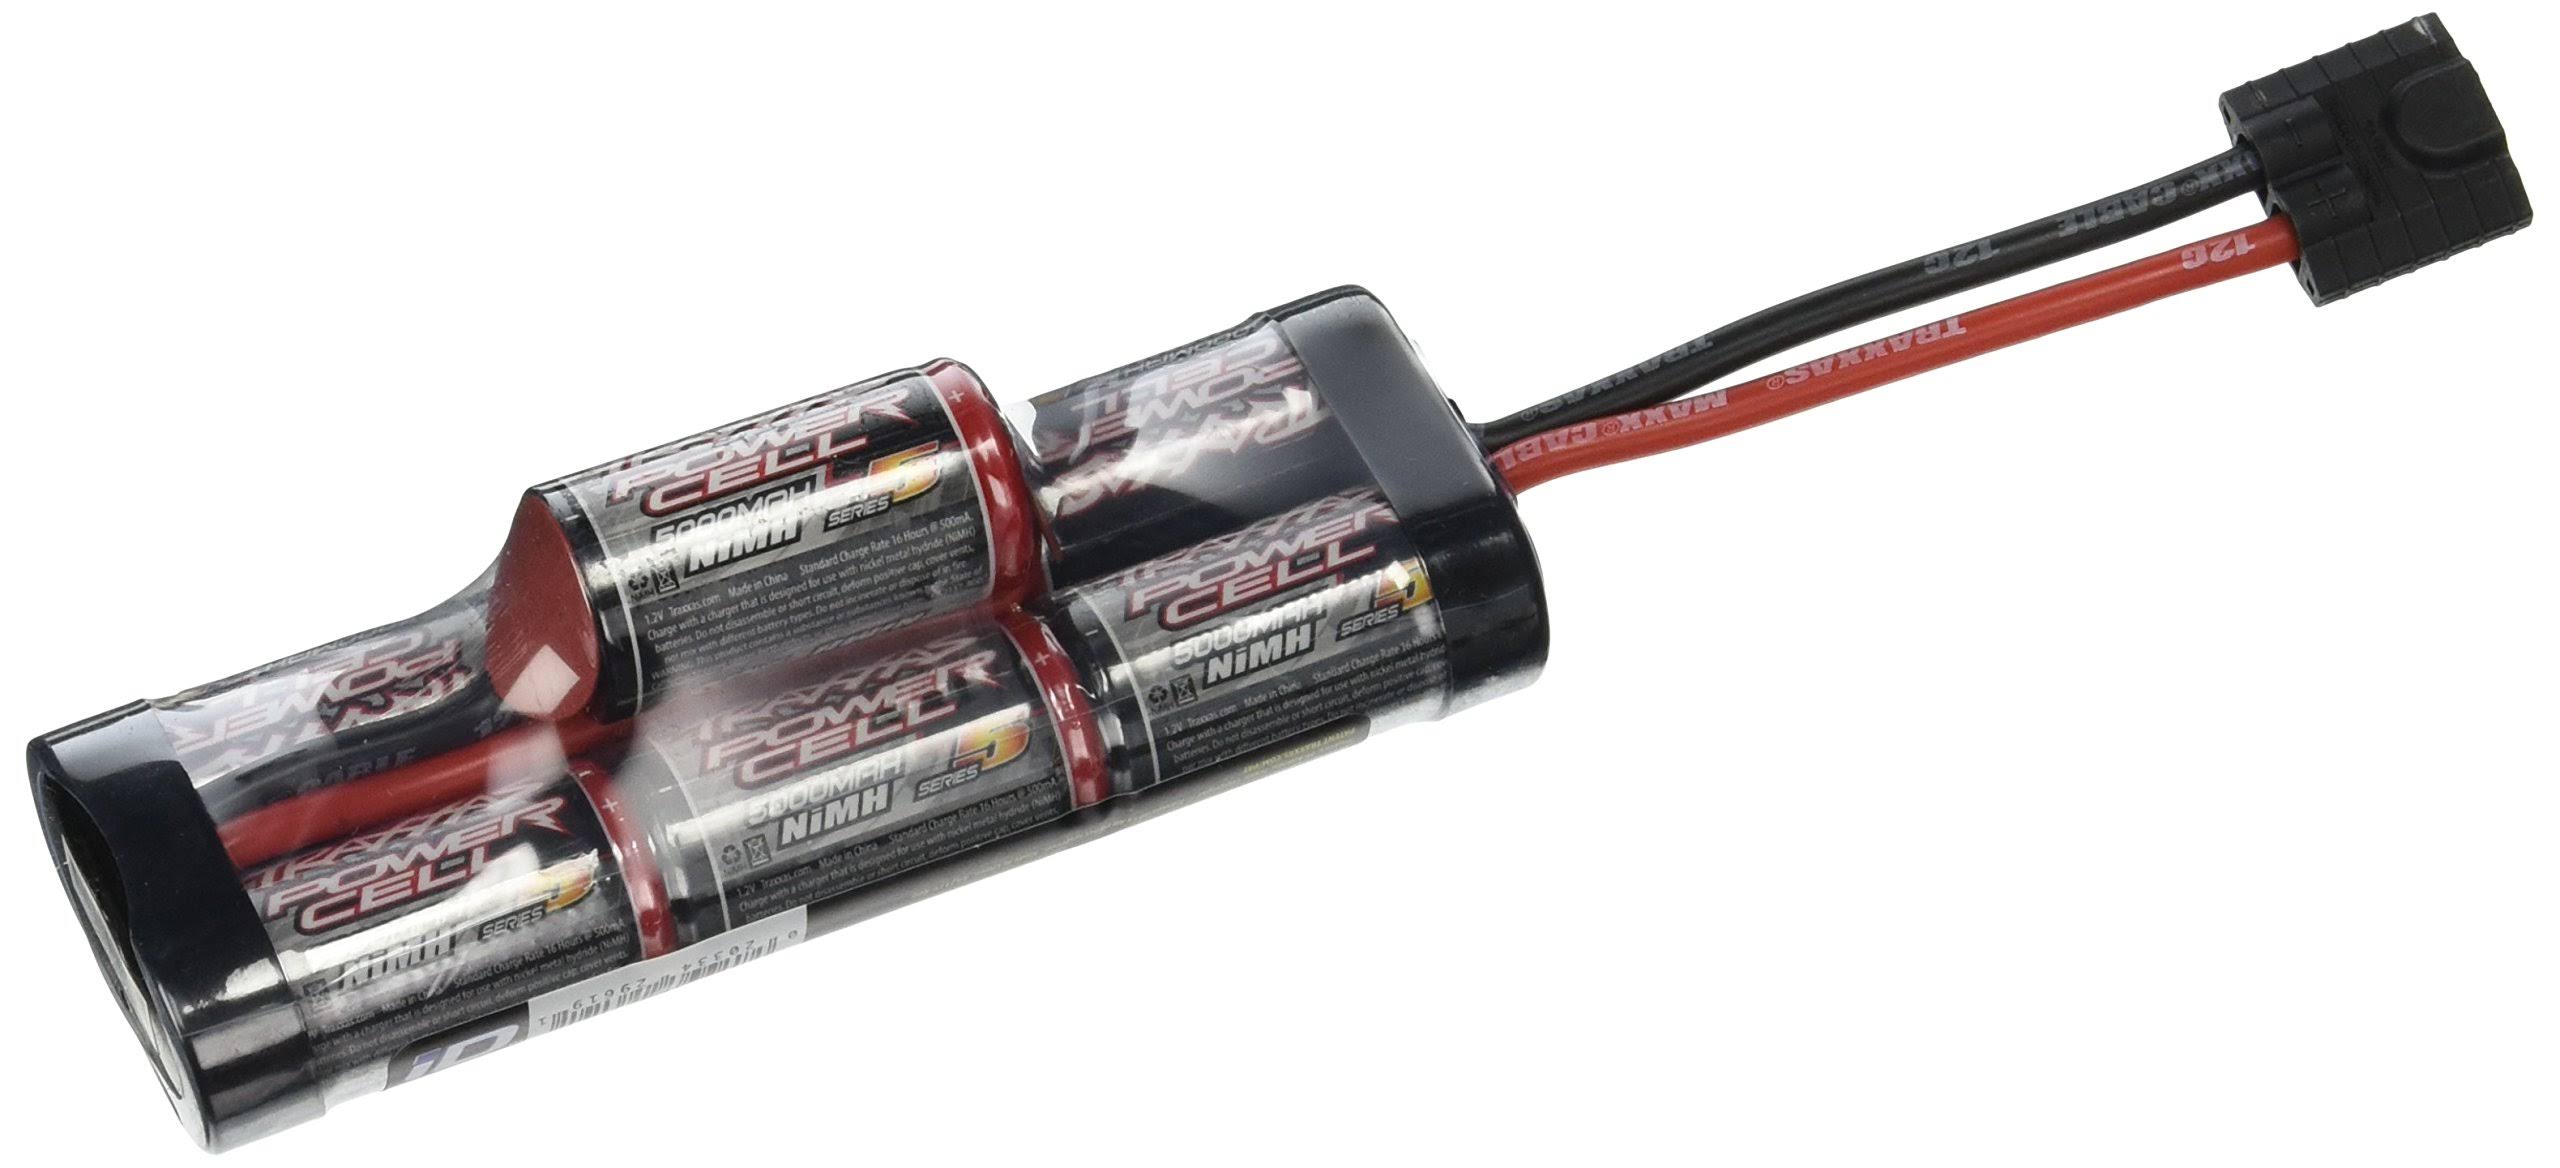 Traxxas 2961X Series 5 NiMH 7-Cell Hump Battery with iD - 8.4V, 5000mAh